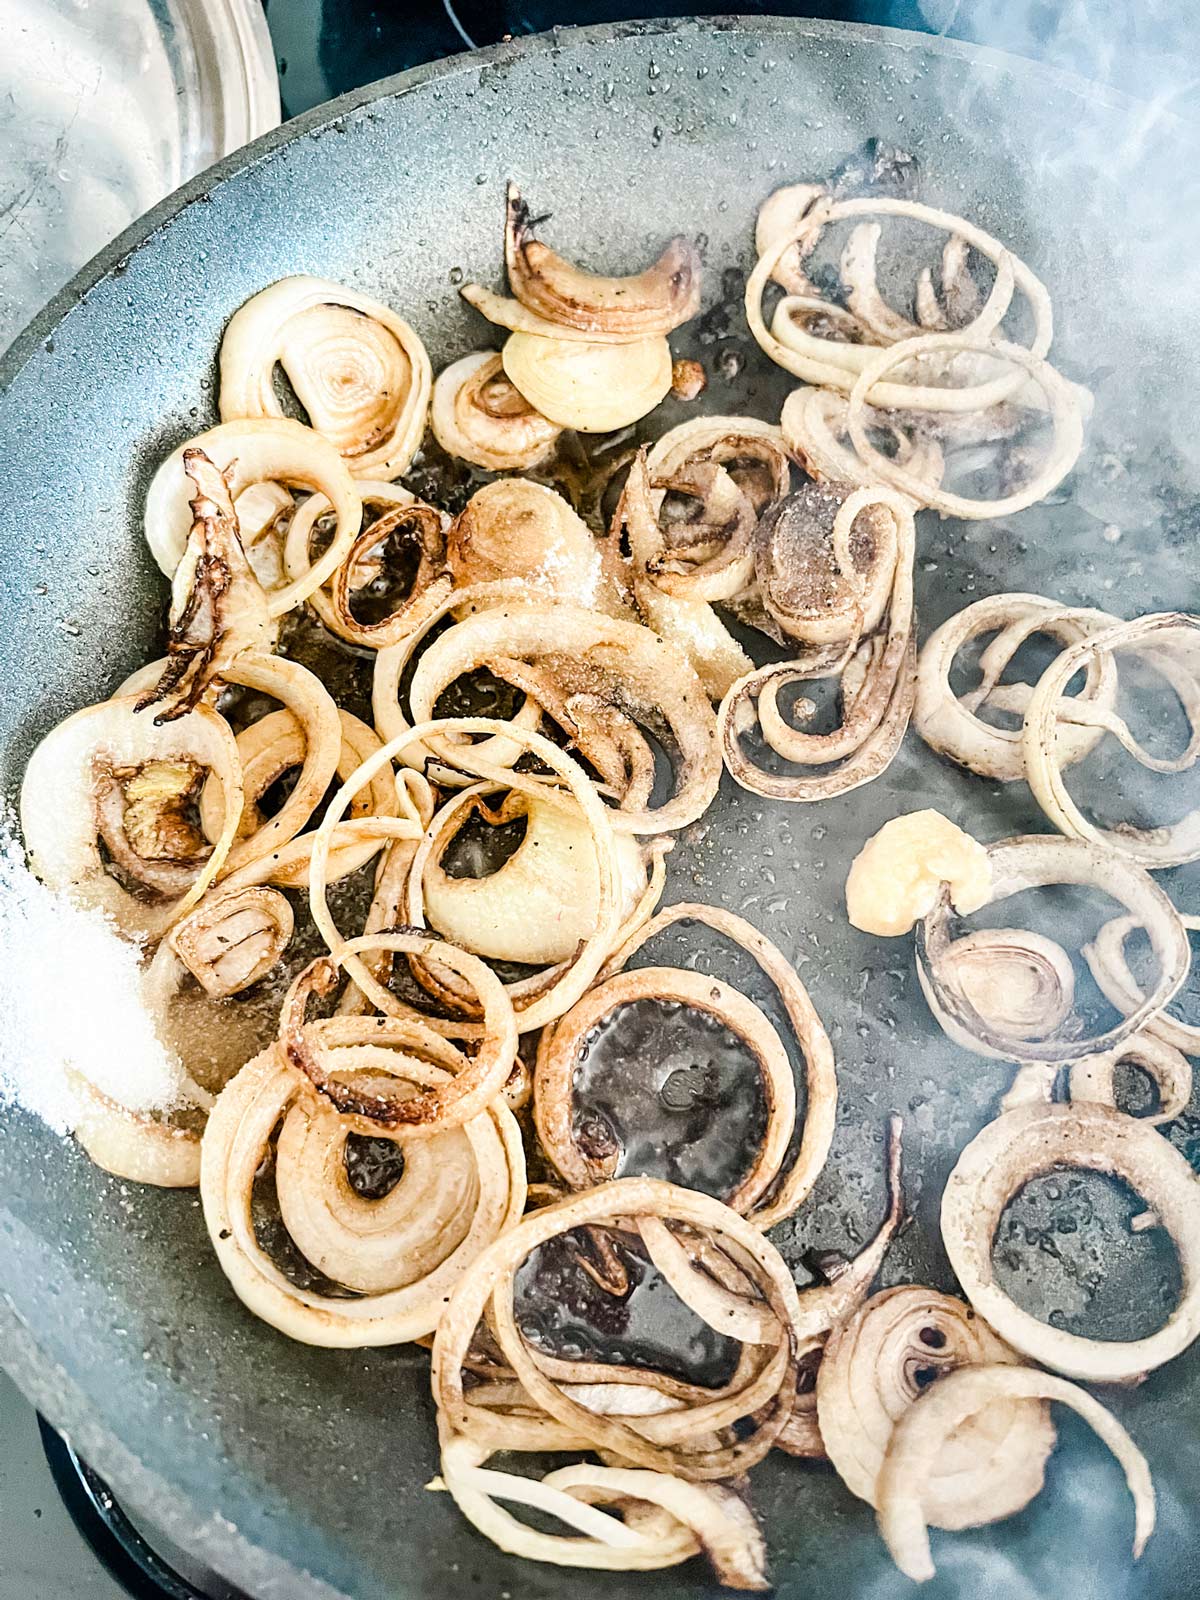 Onions cooking on a skillet.